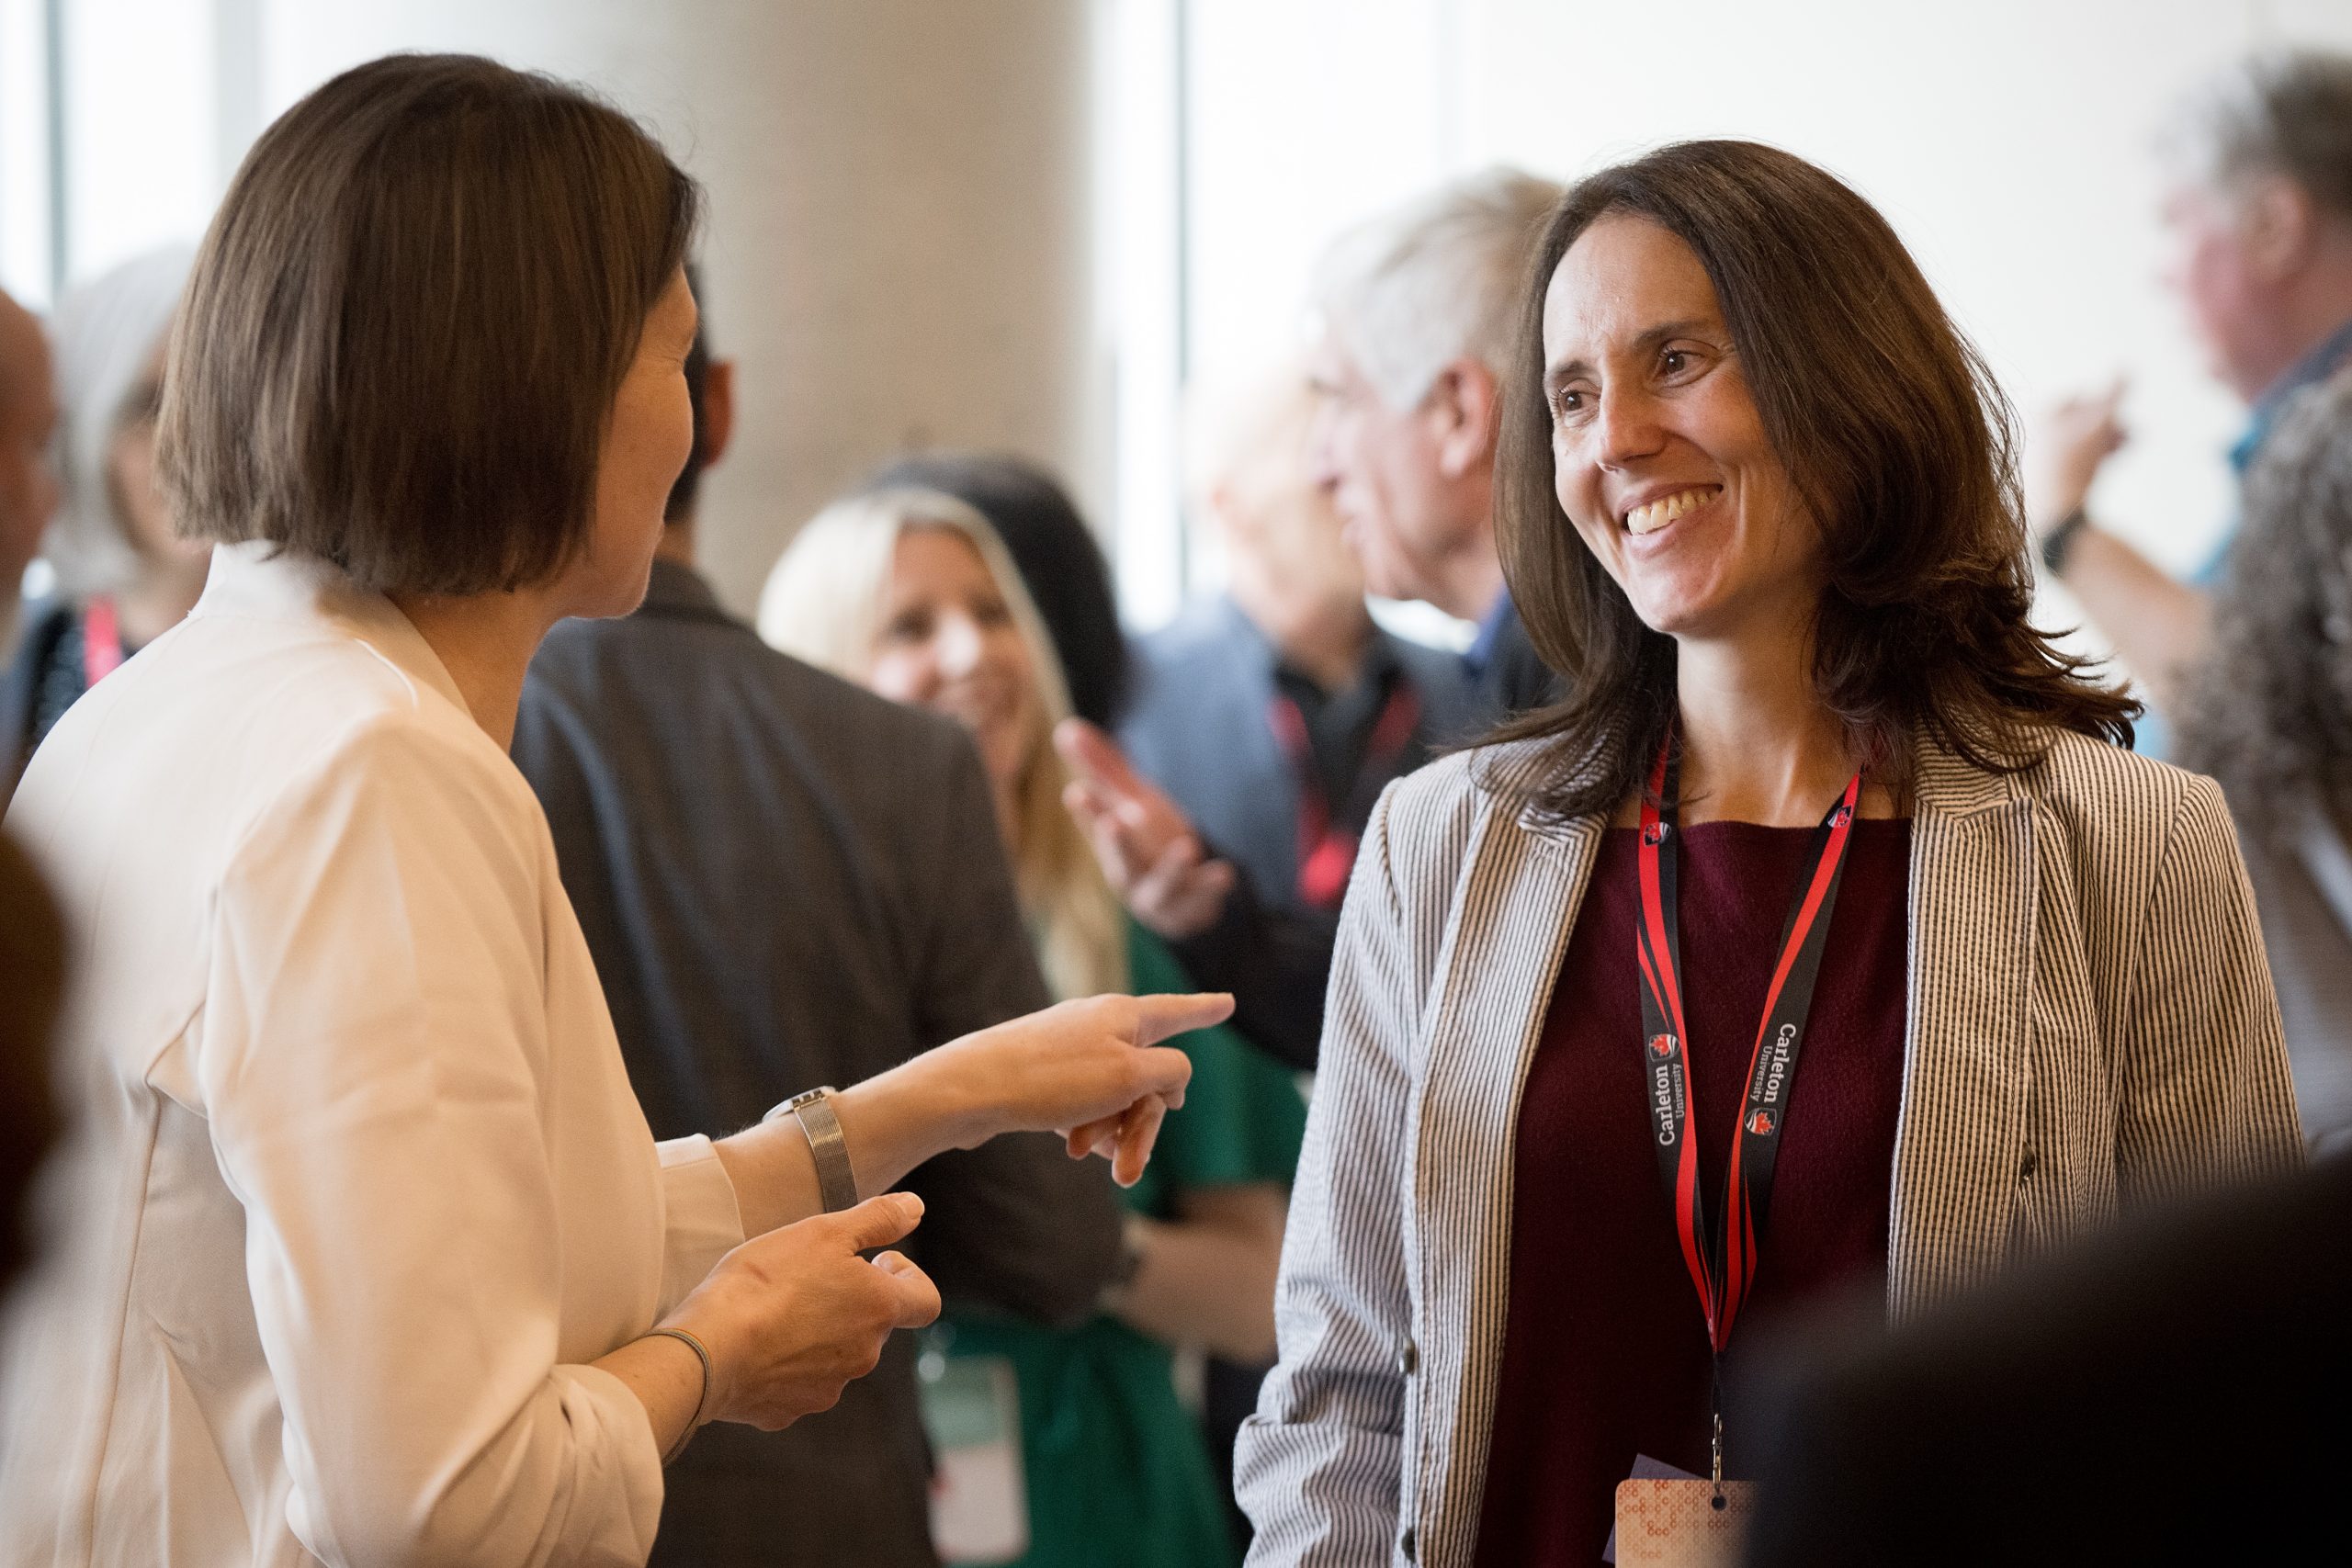 Two women networking at a conference event with a crowf of people behind them